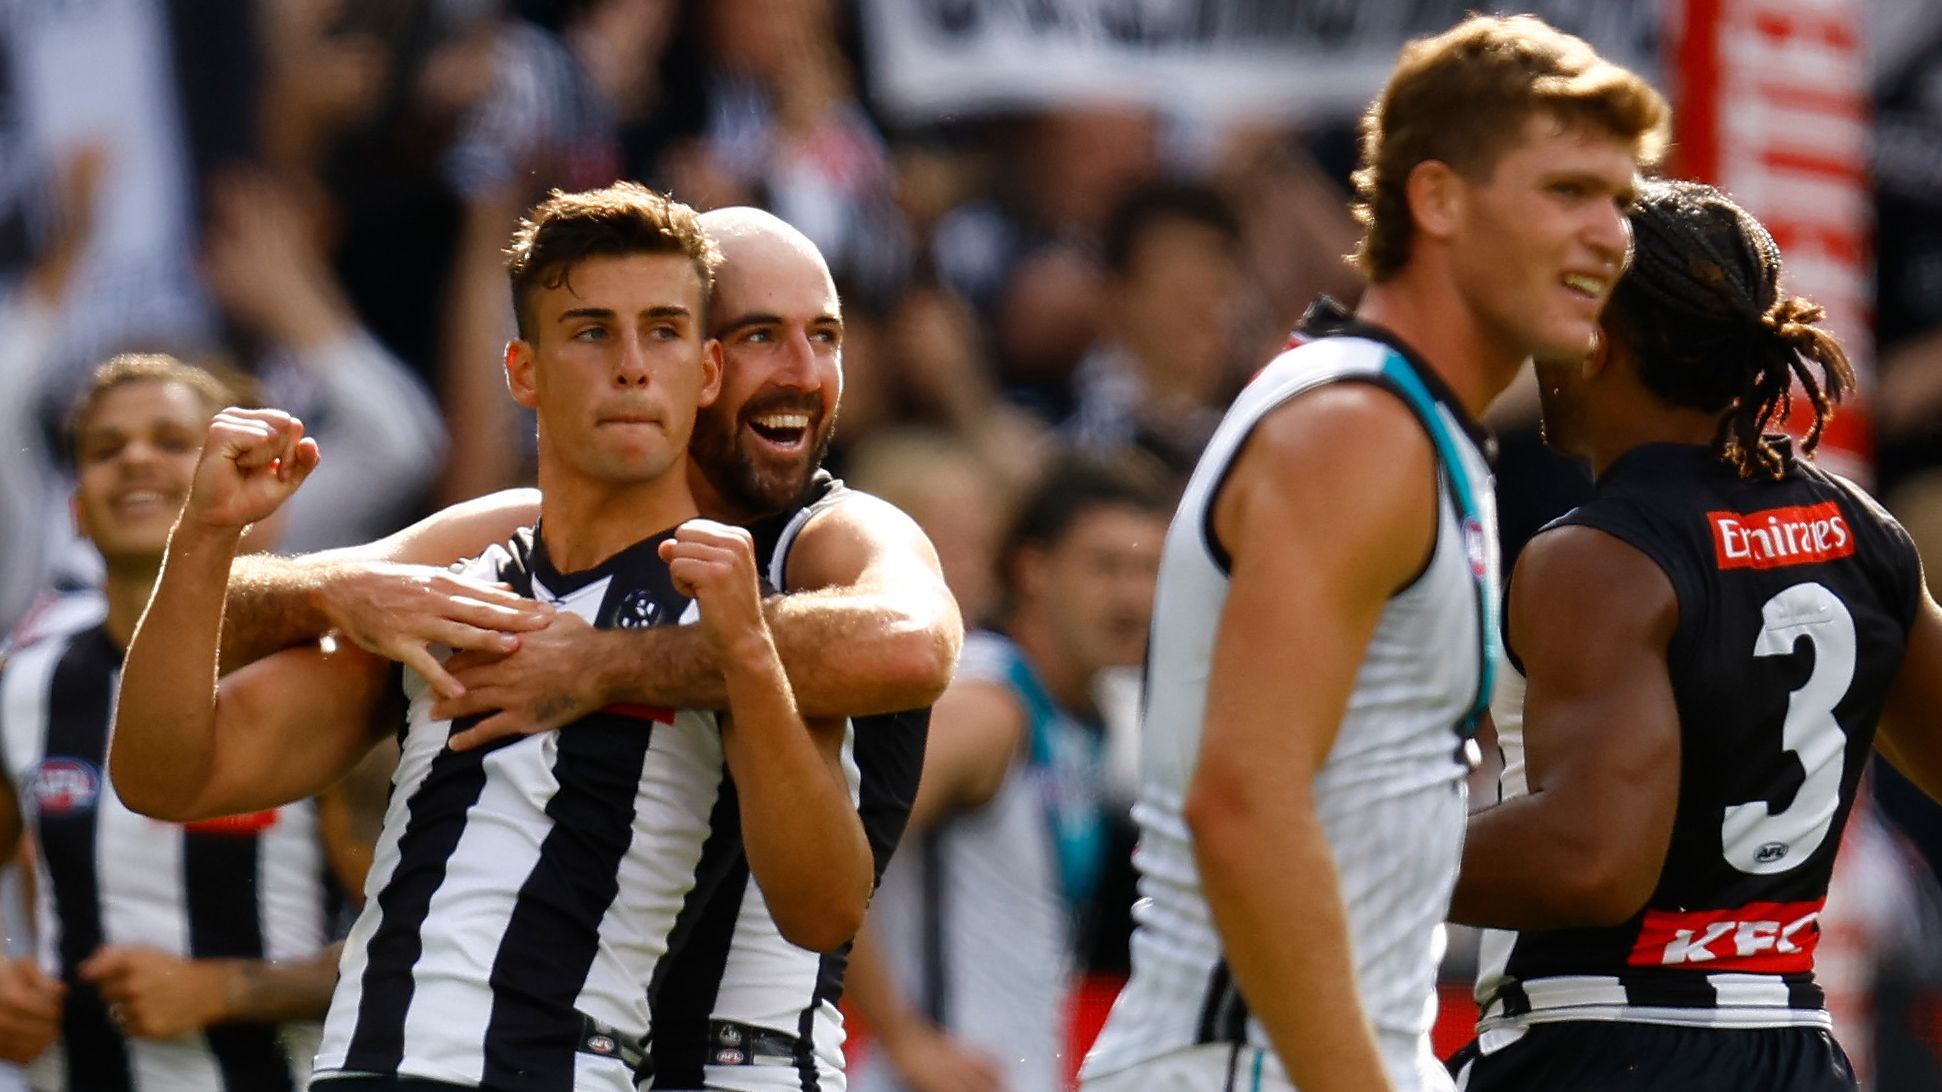 Collingwood lauded as 'new premiership favourite' after frightening demolition of Port Adelaide